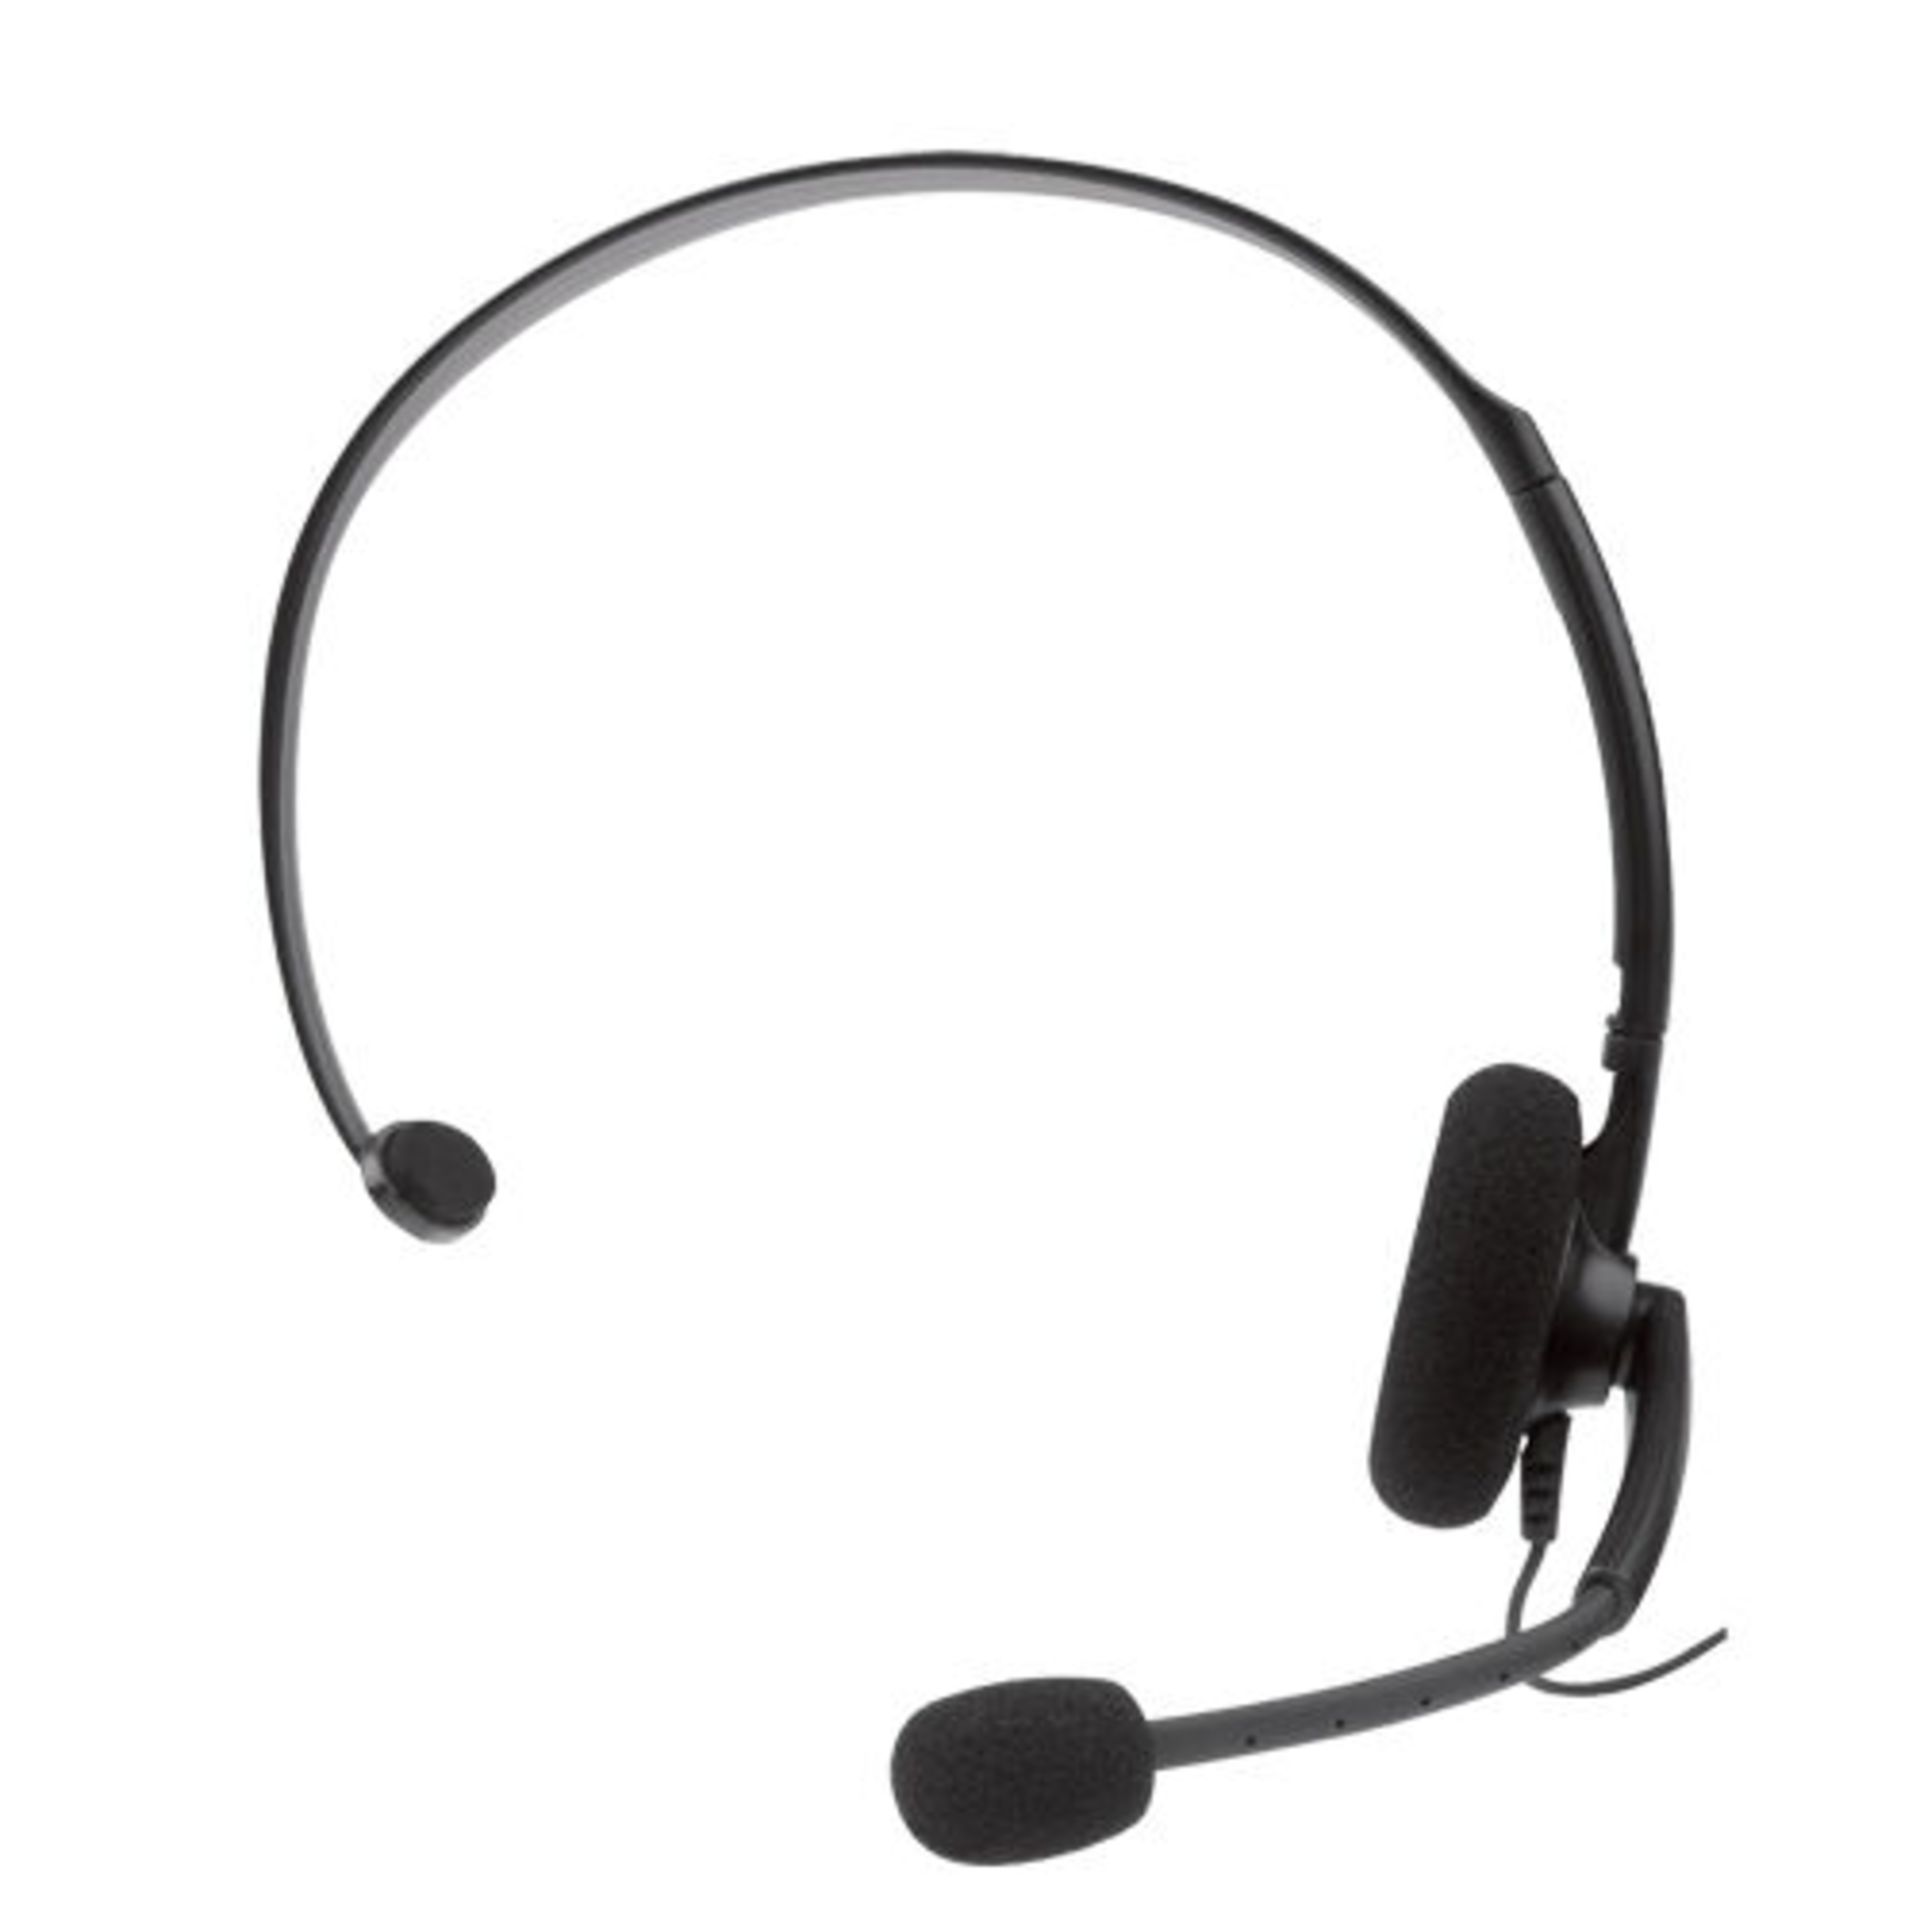 JOBLOT 50 X NEW OFFICIAL XBOX 360 LIVE ONLINE CHAT HEADSET WITH MIC GAMING HEADPHONES 2.5MM AUX - Image 3 of 5